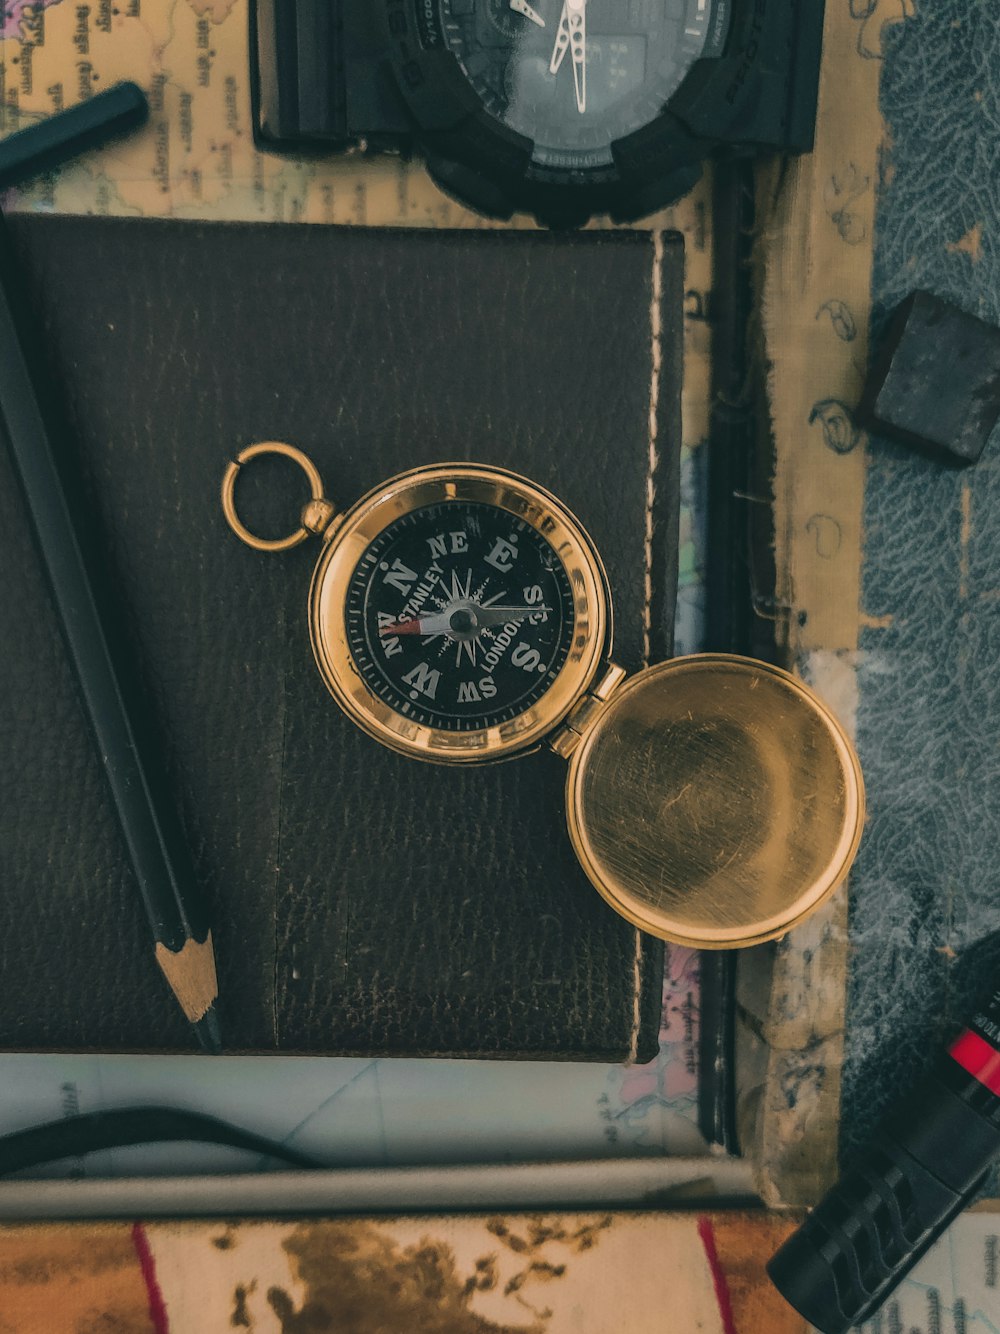 a pocket watch and a compass on a table